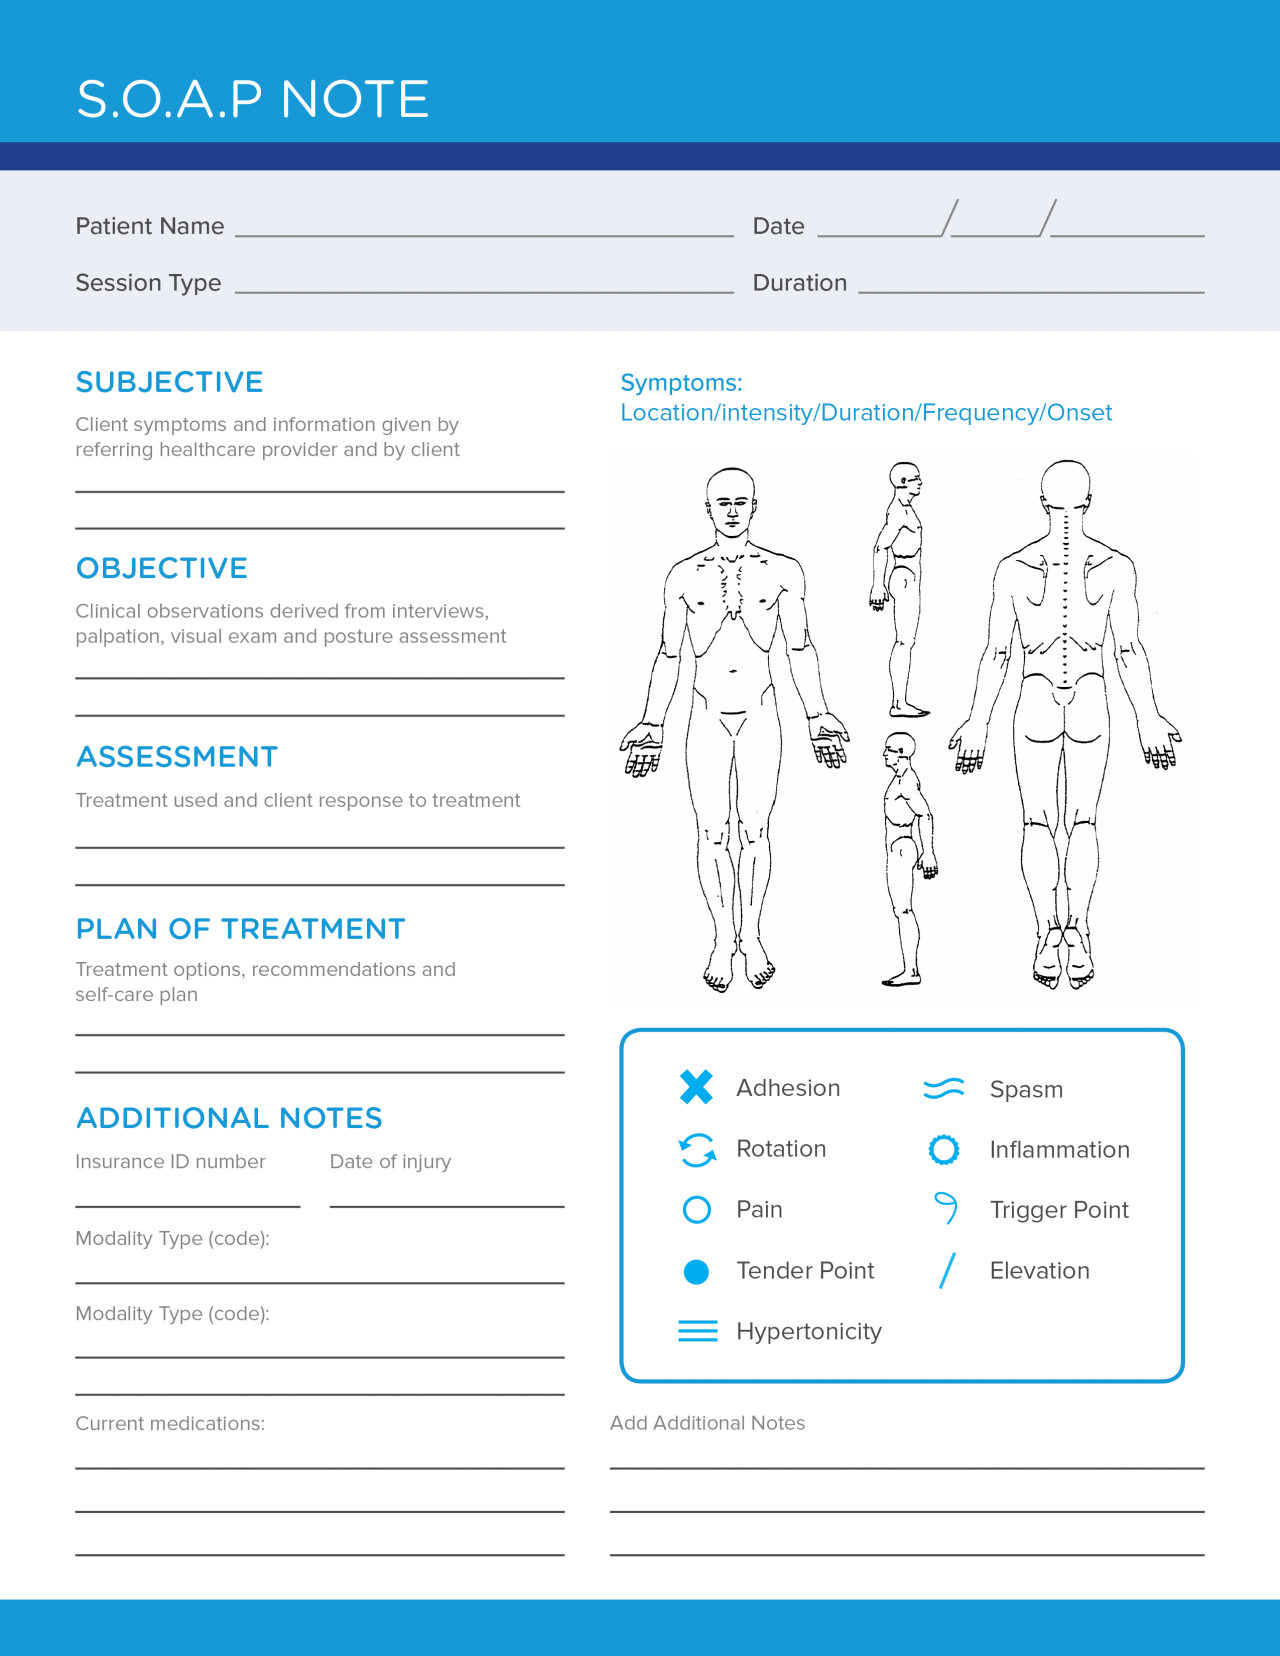 Free SOAP Notes Templates For Busy Healthcare Professionals  Capterra Intended For Blank Soap Note Template